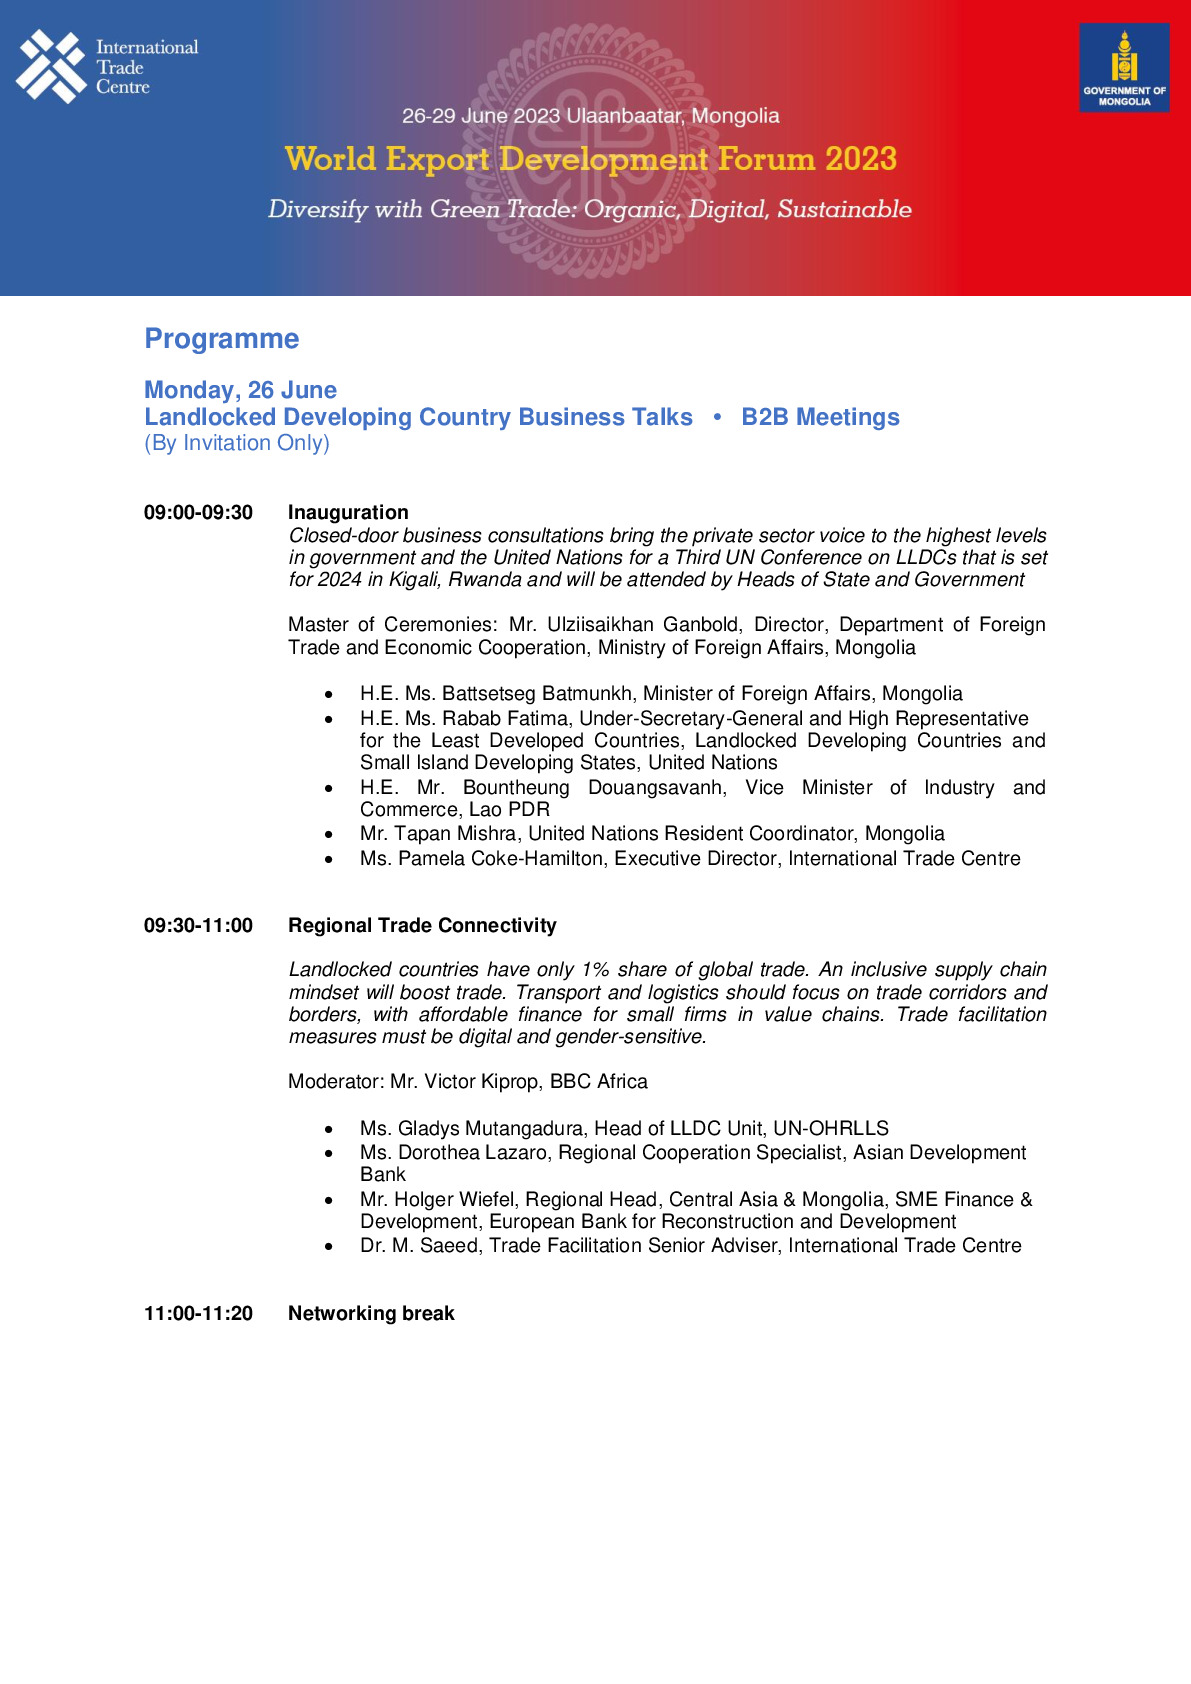 Provisional Programme WEDF 2023_22 June 2023